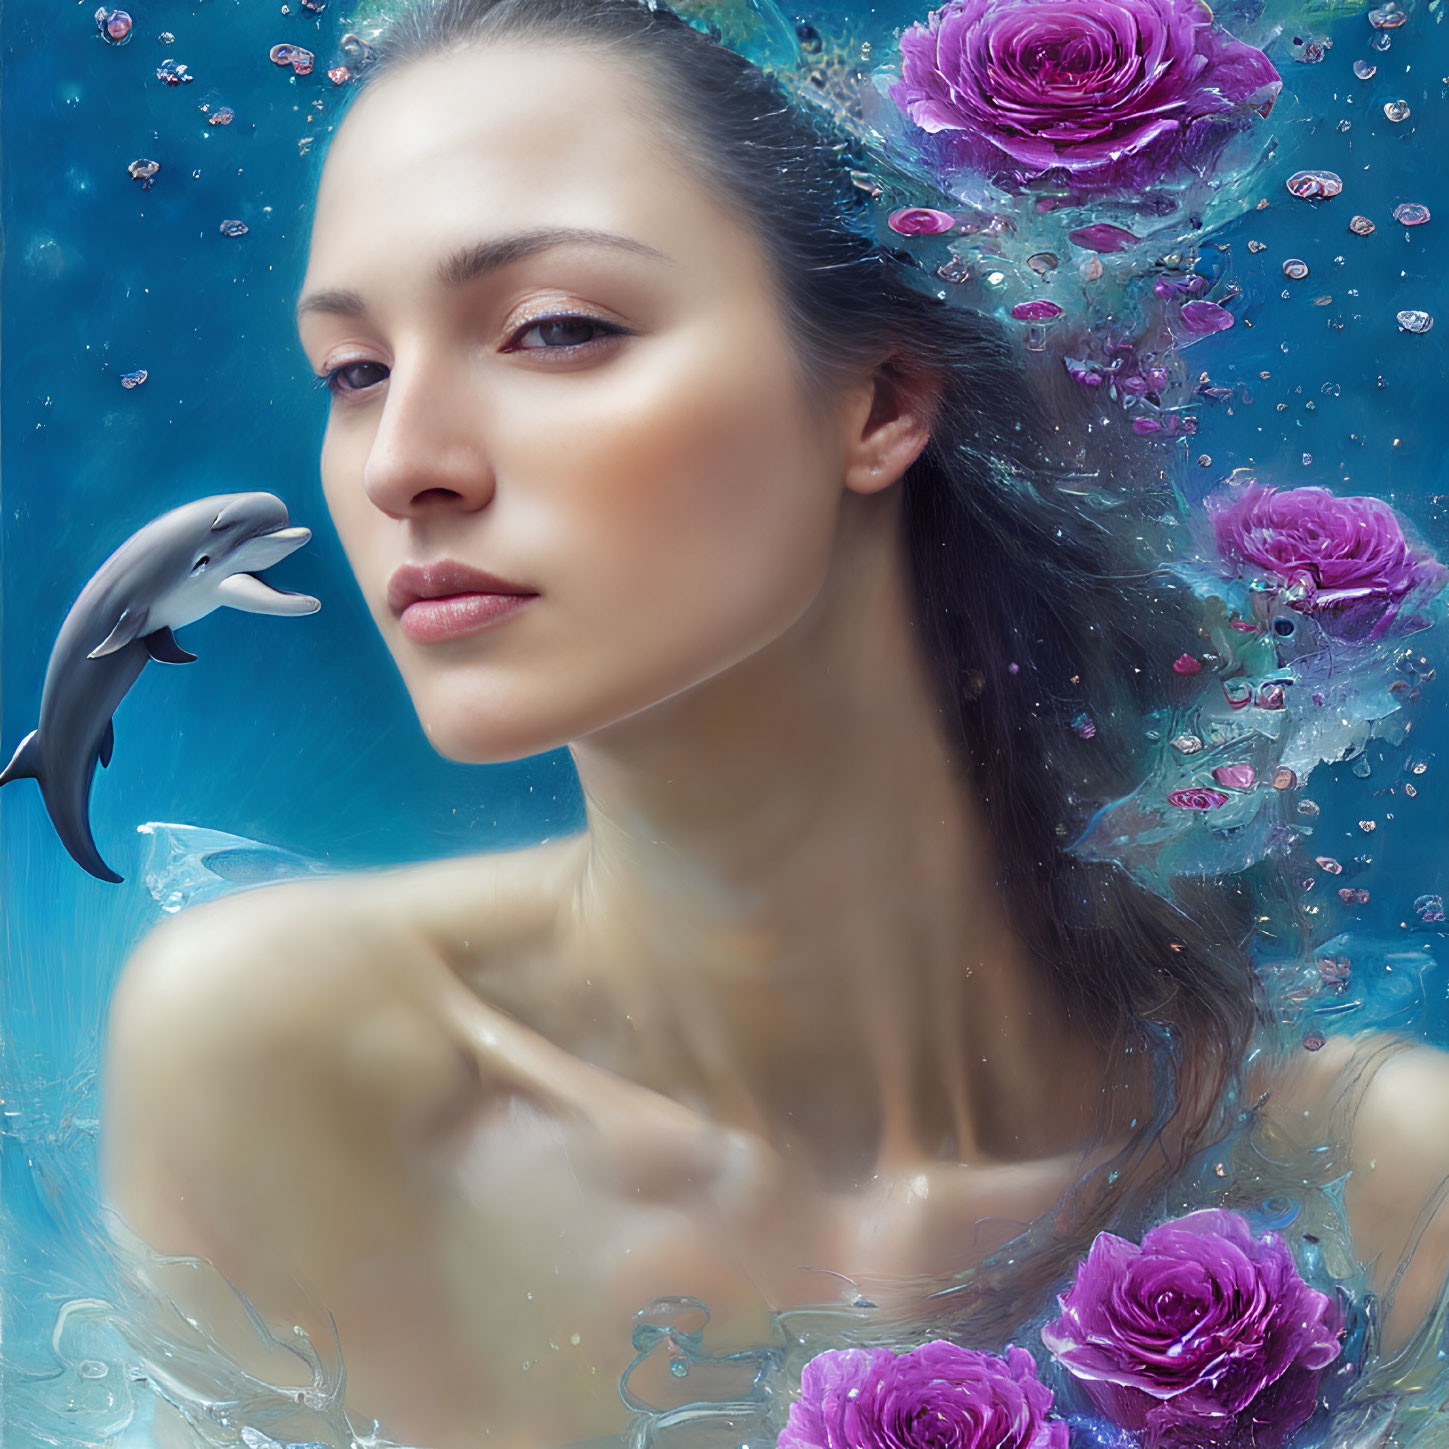 Woman Submerged in Water with Pink Roses and Dolphin in Dreamlike Scene